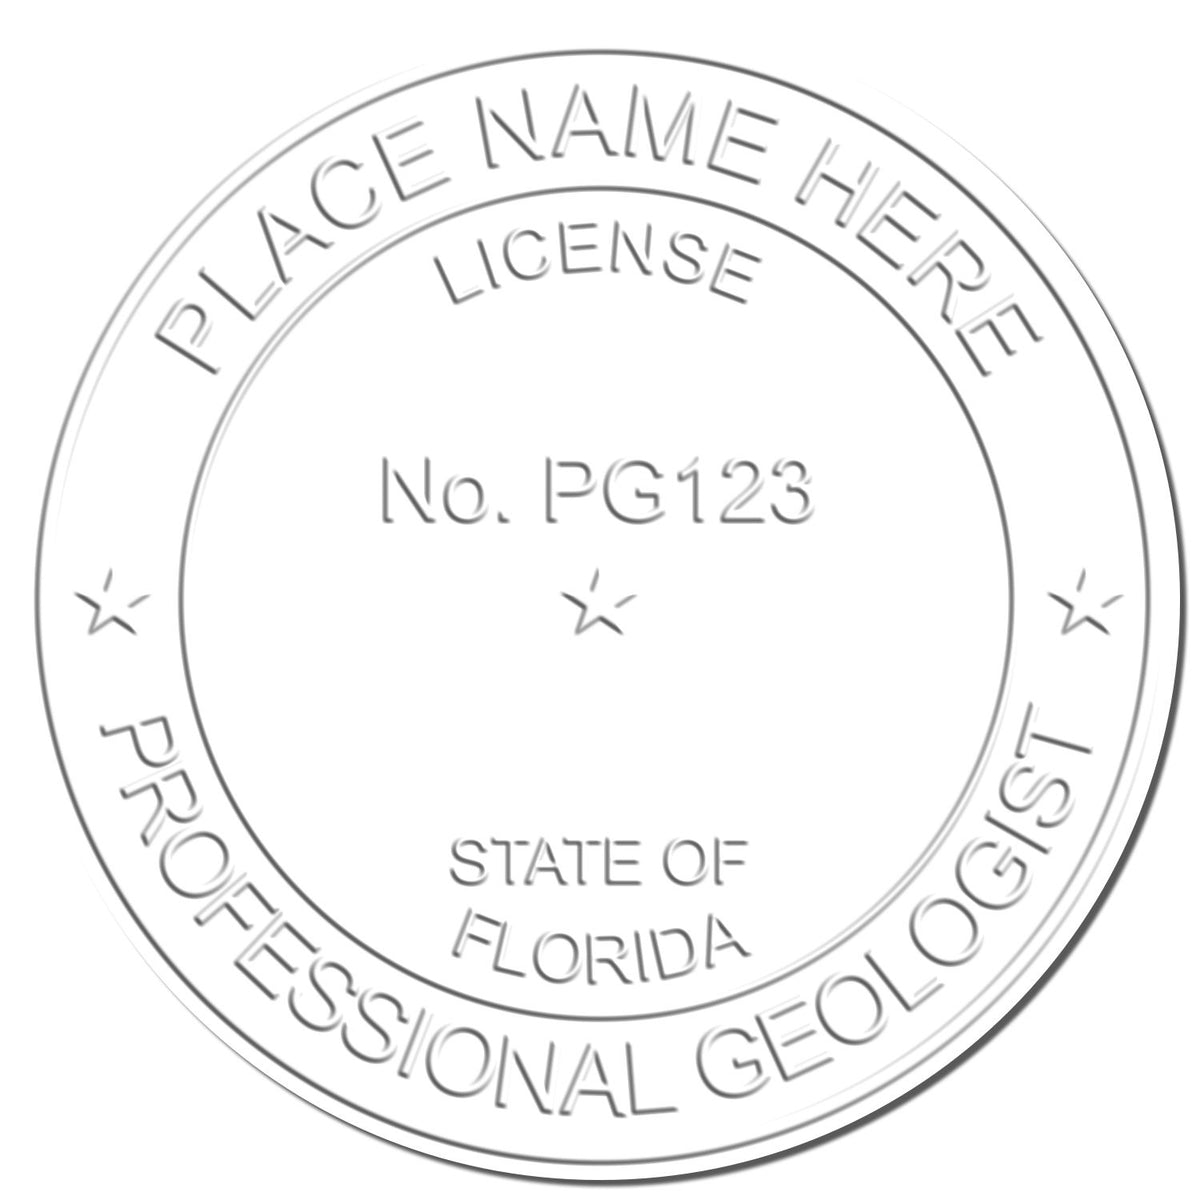 A photograph of the Hybrid Florida Geologist Seal stamp impression reveals a vivid, professional image of the on paper.